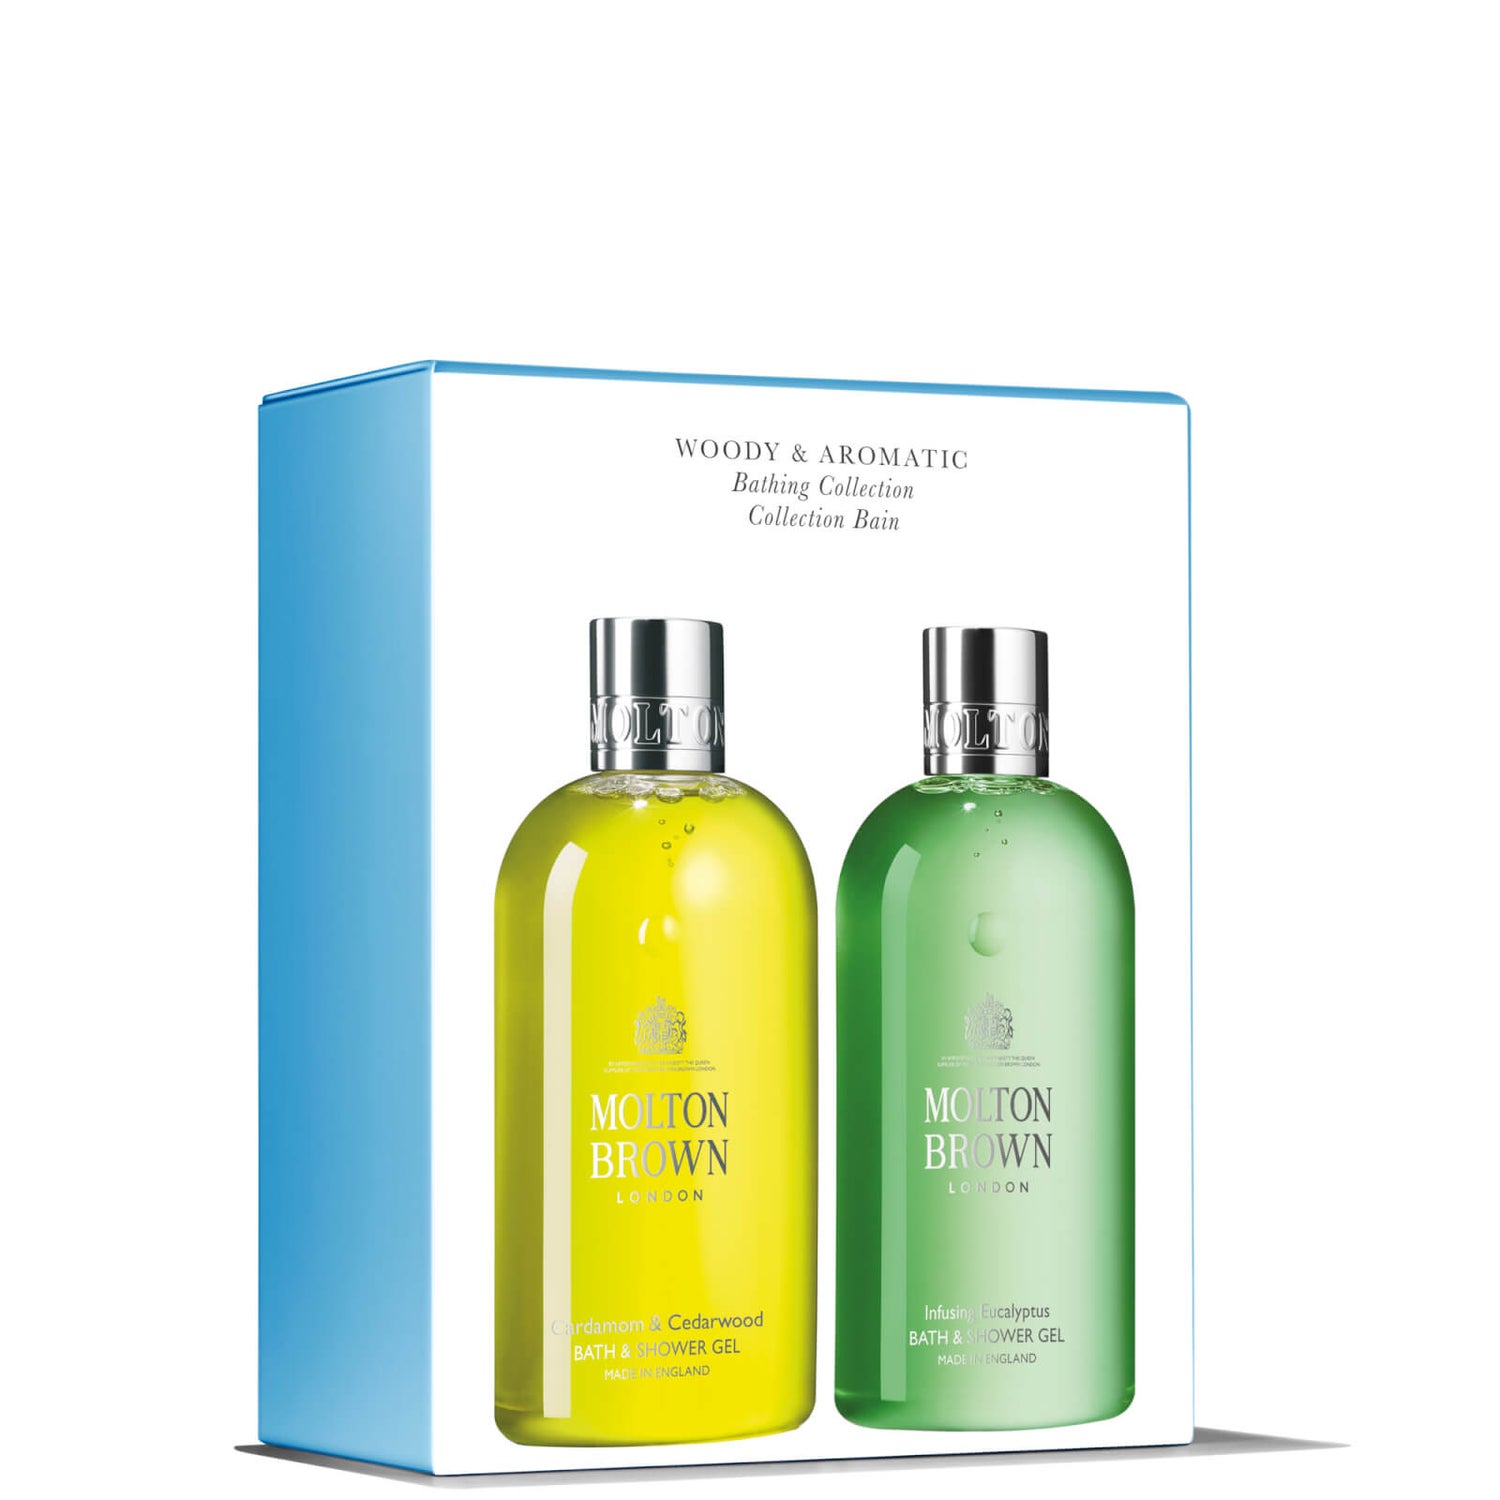 Molton Brown Woody and Aromatic Bathing Collection